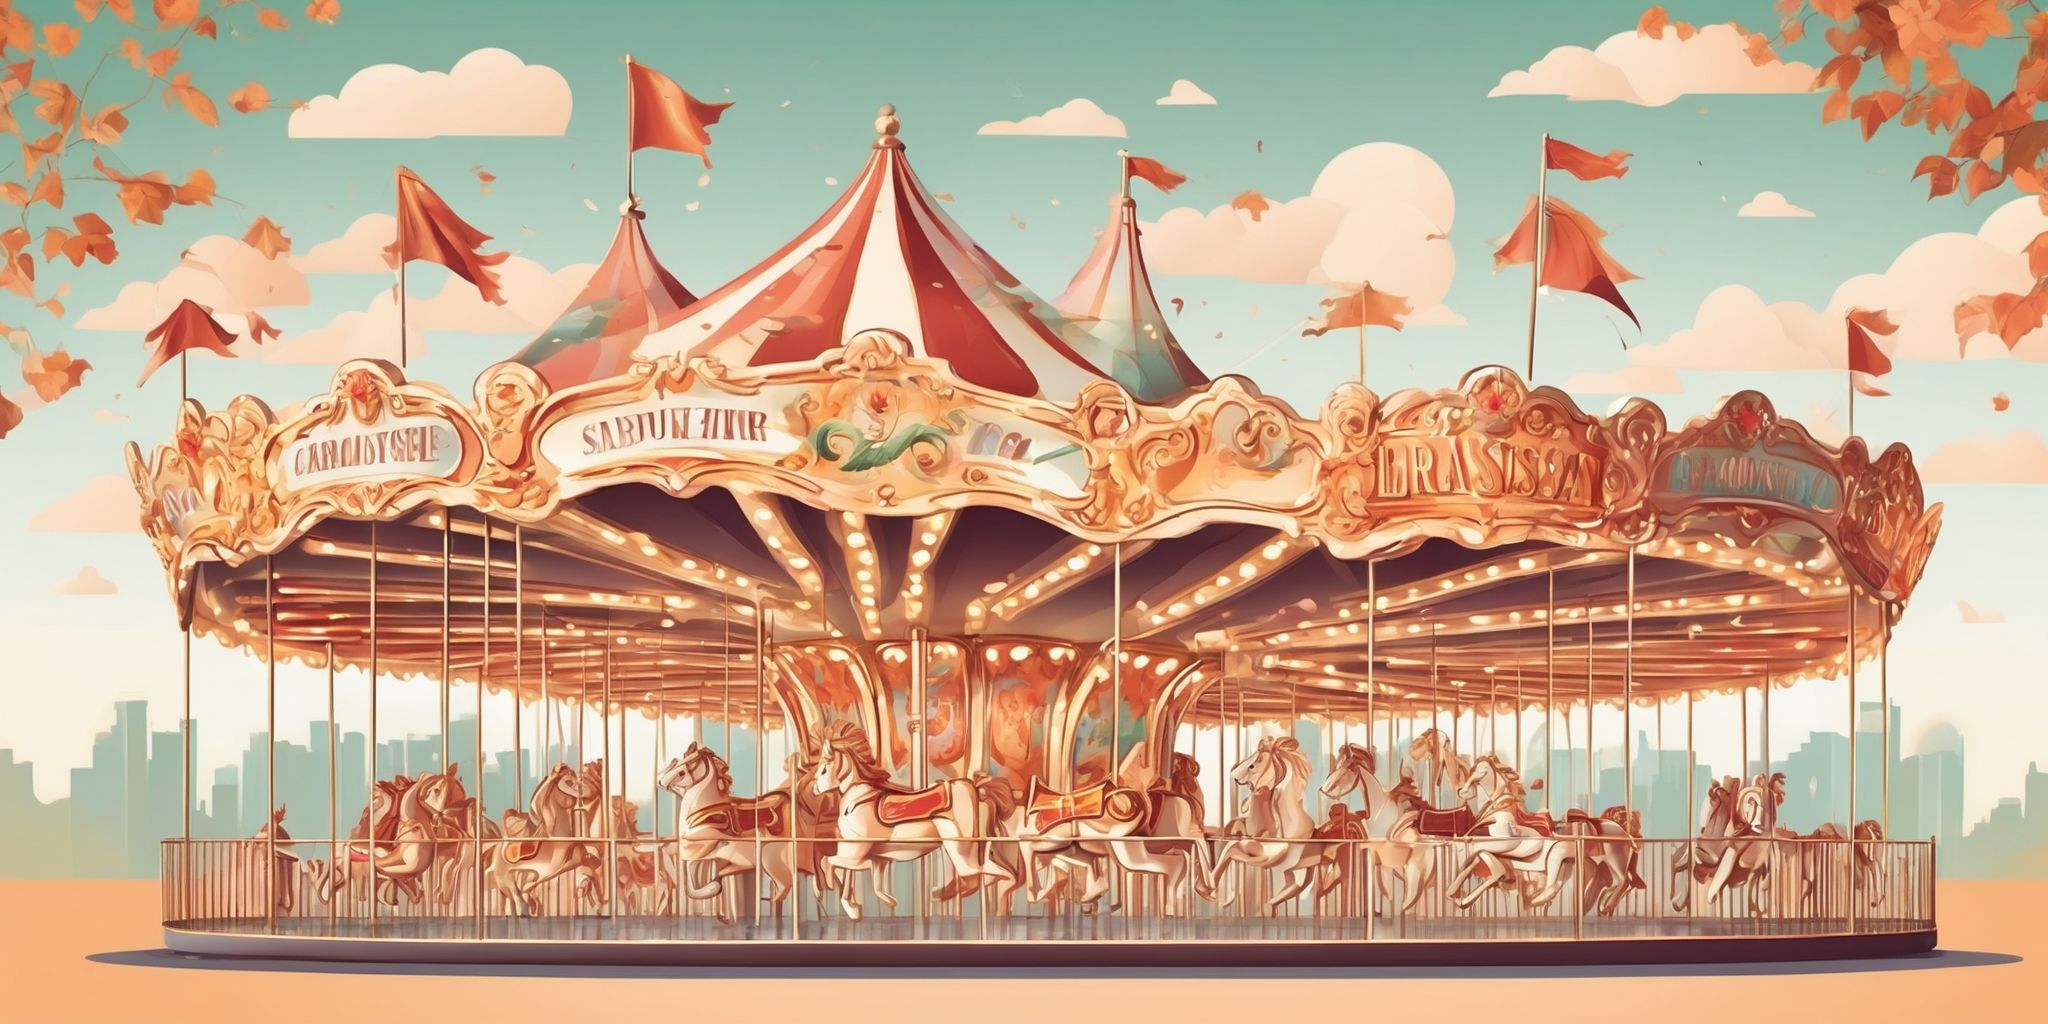 Carousel Ads in illustration style with gradients and white background